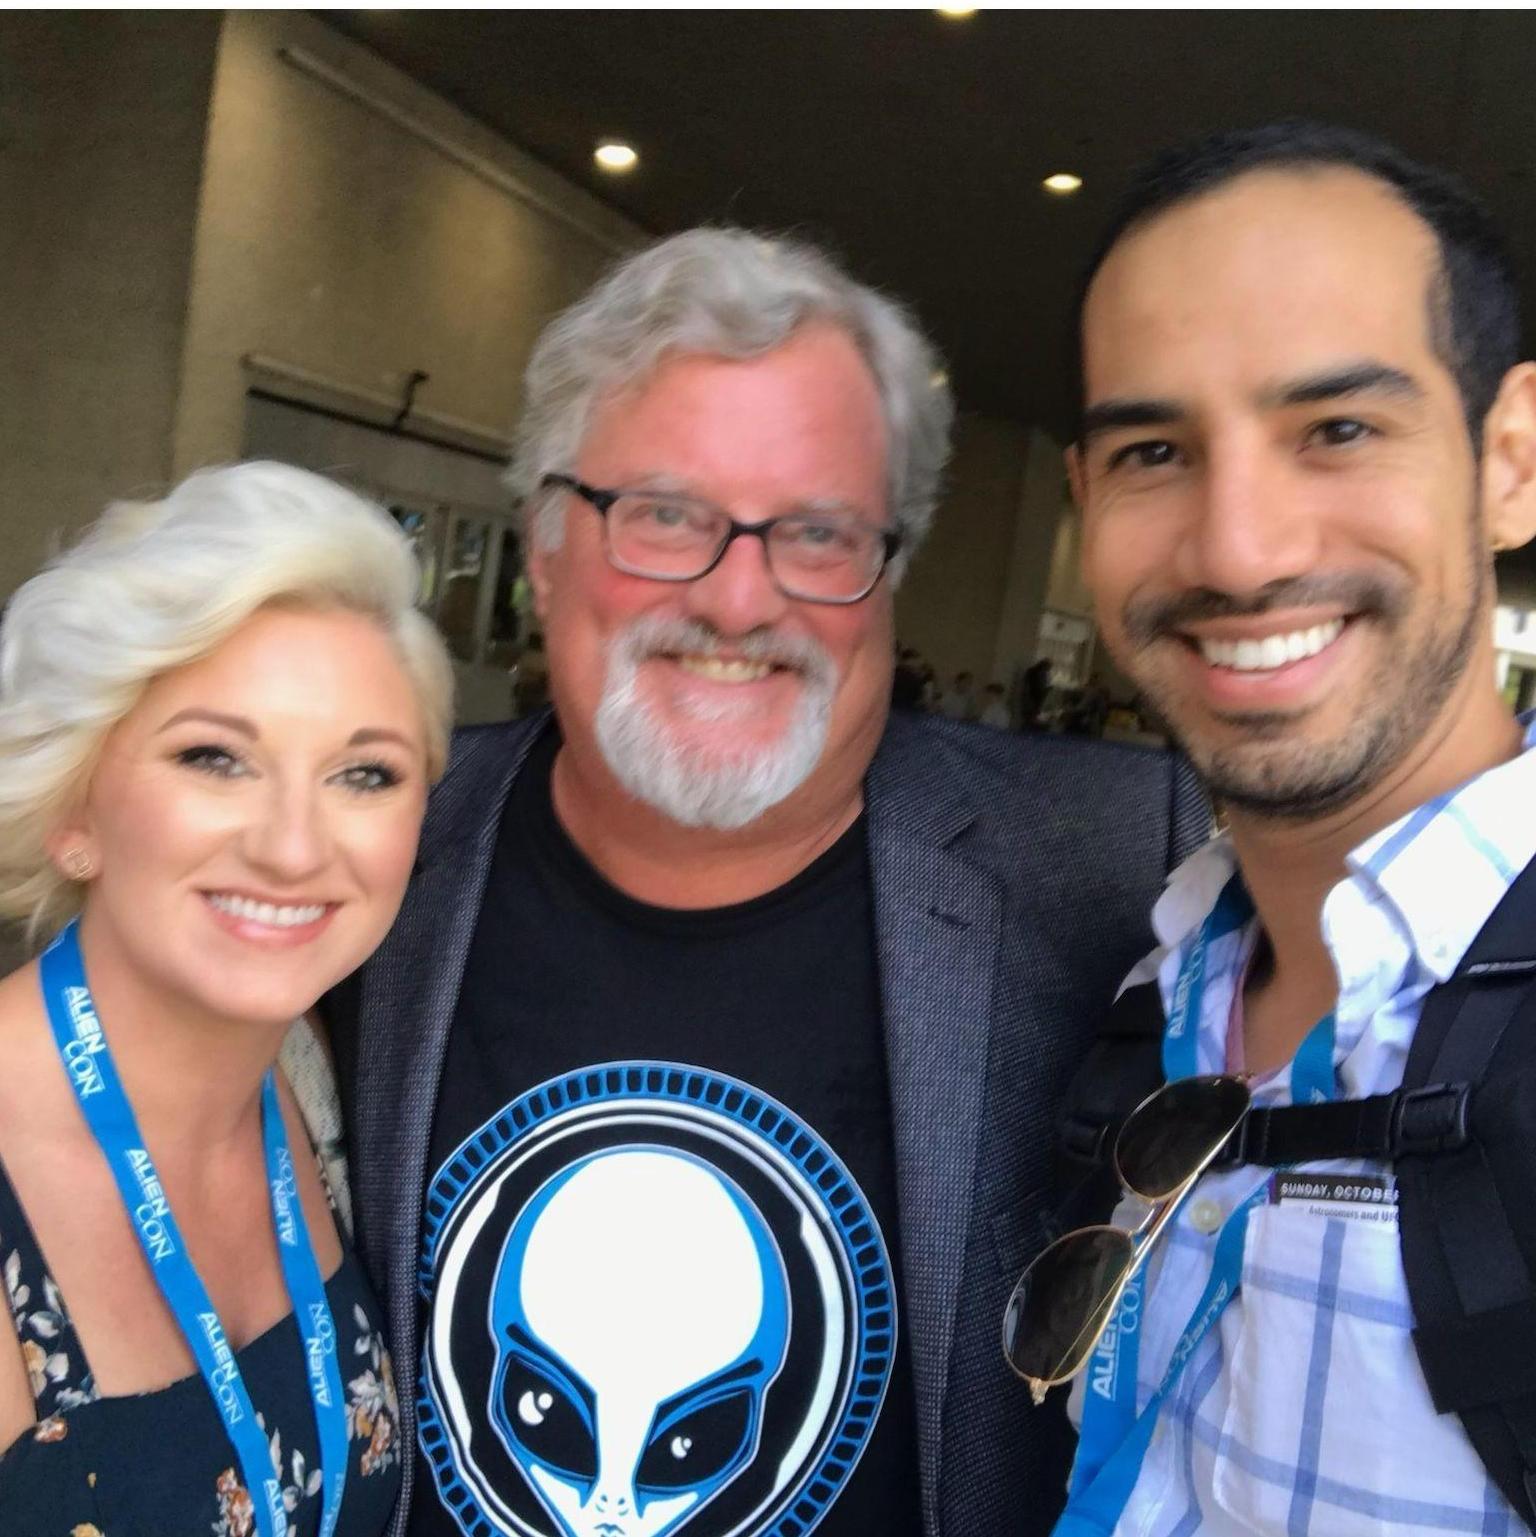 That time we met David Childress (from Ancient Aliens) at AlienCon 2019.